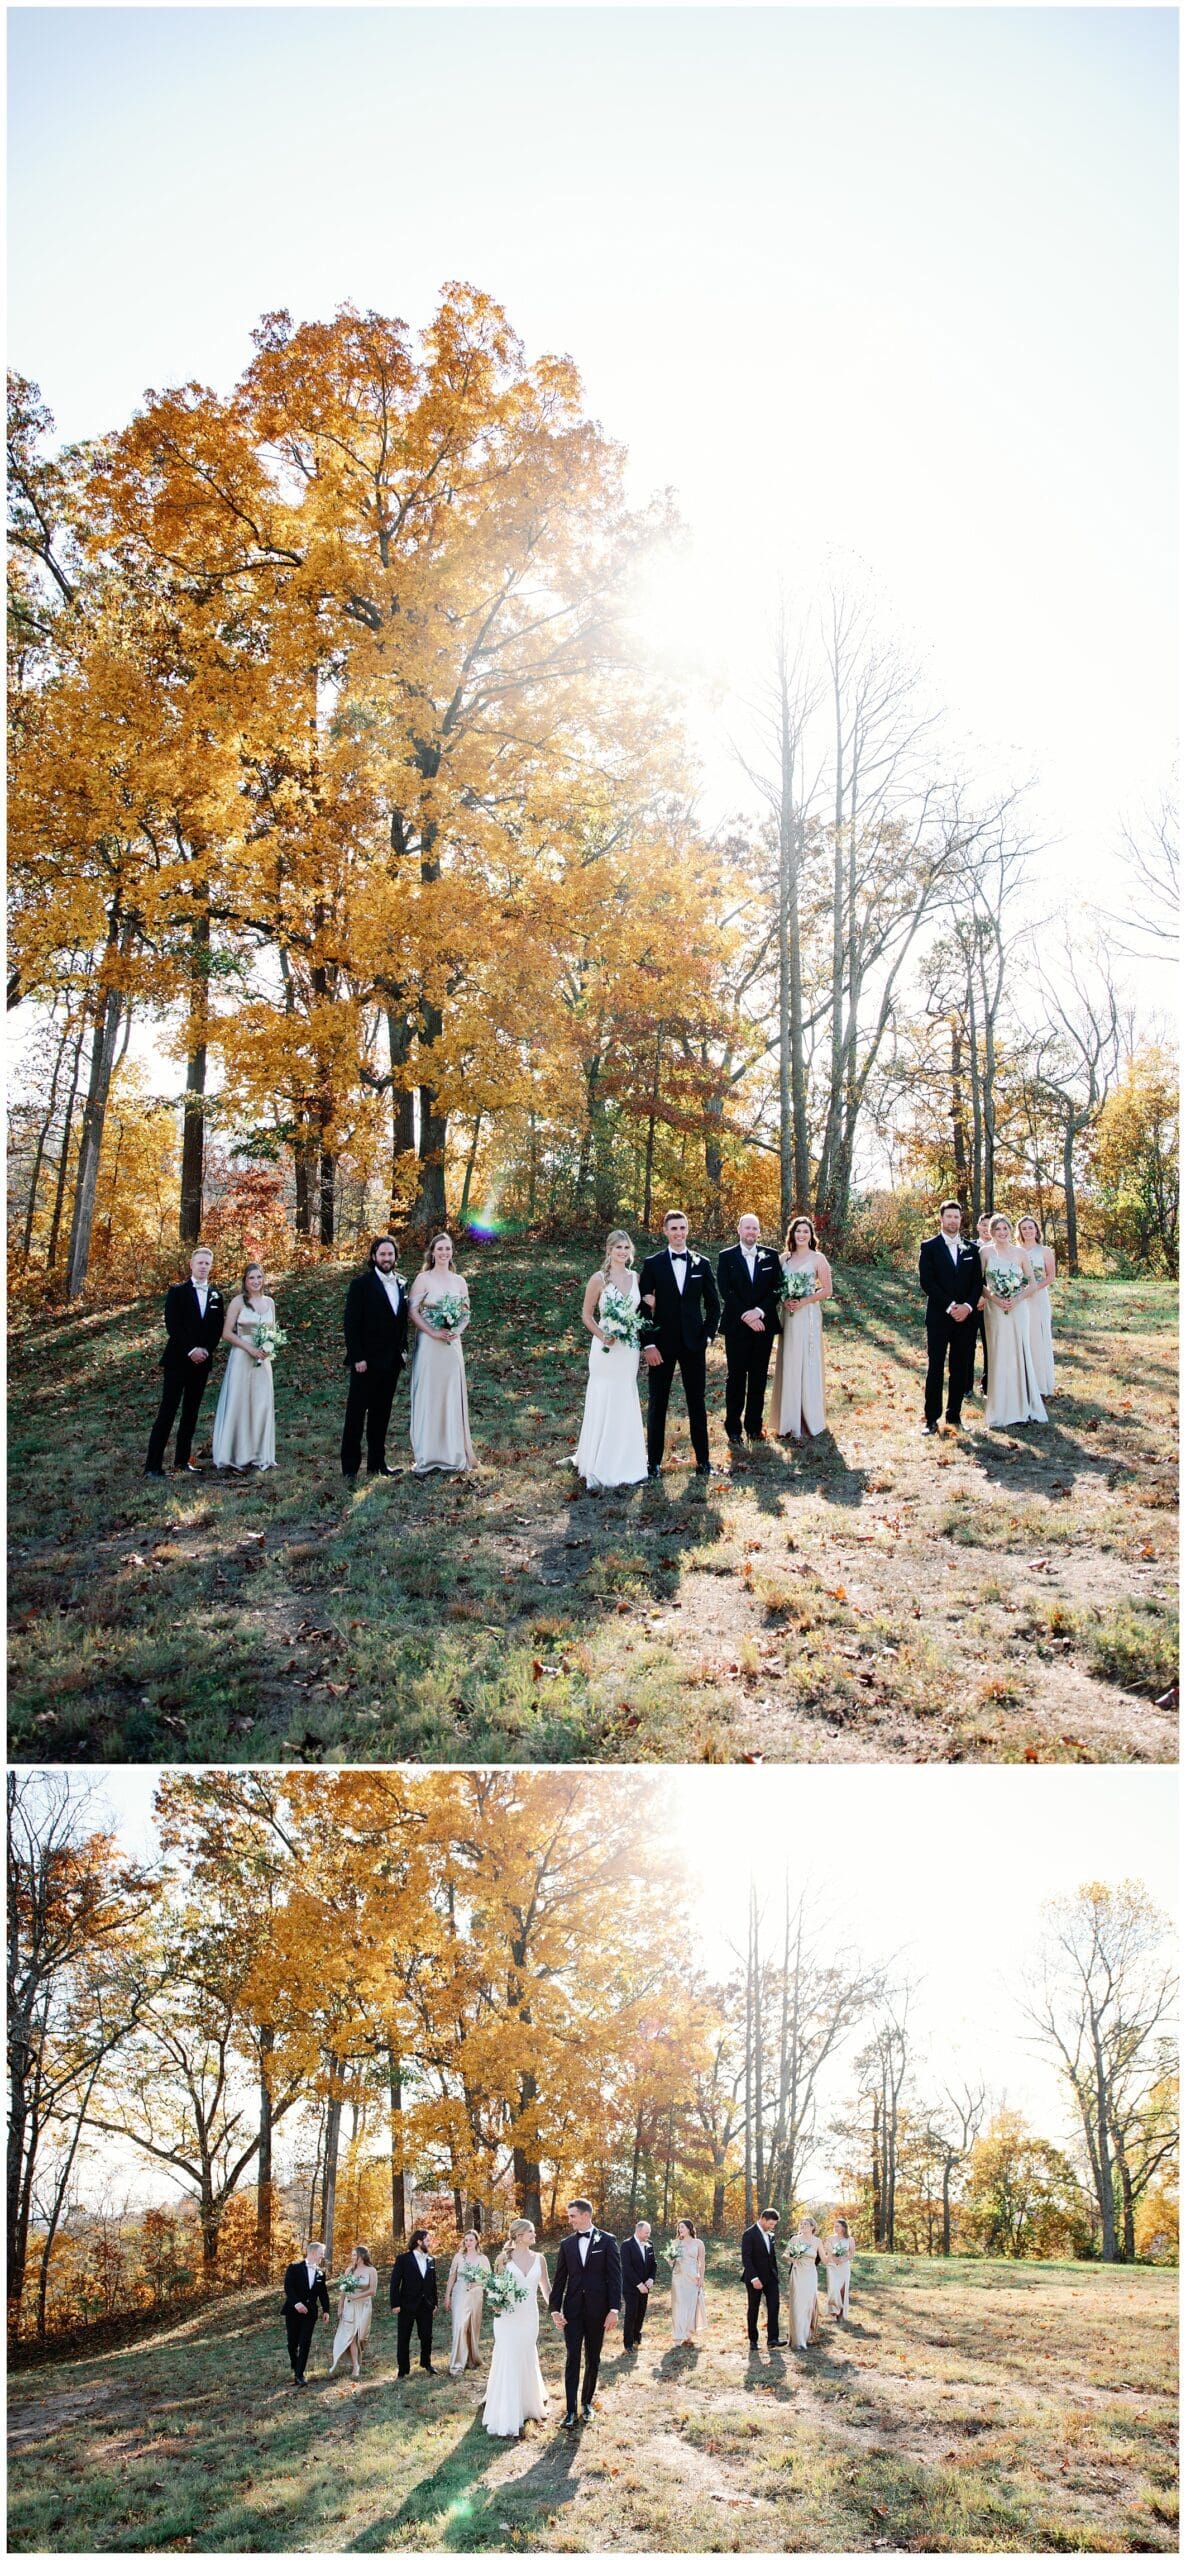 A group of bridesmaids and groomsmen standing in a field at a fall wedding at crest center.